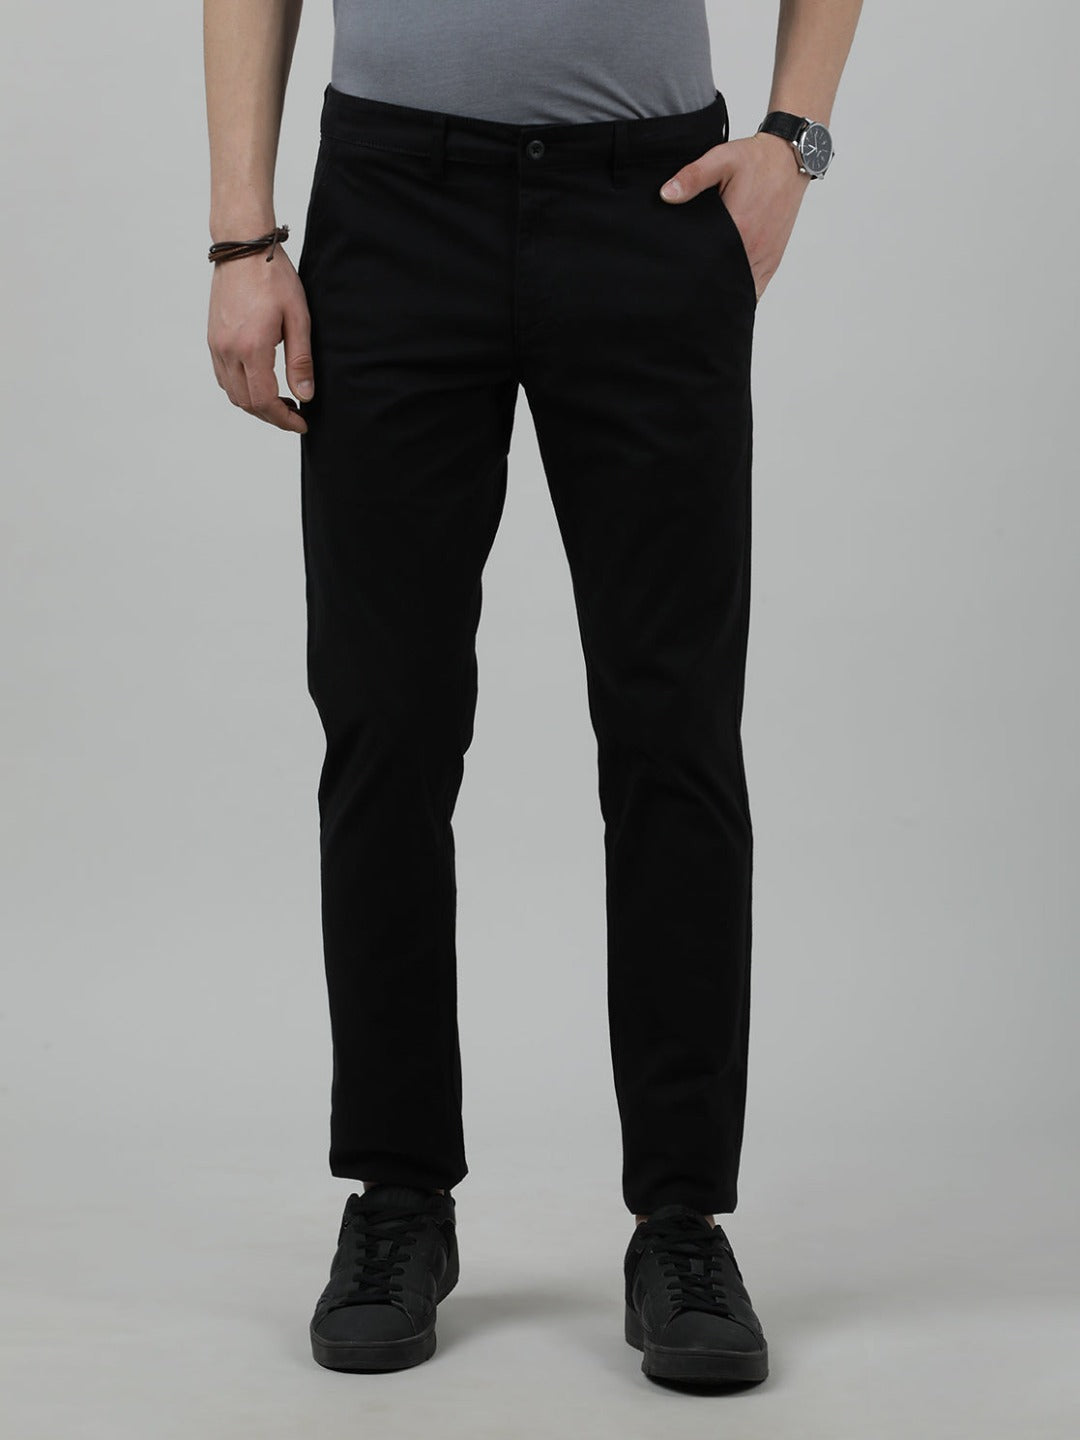 Casual Slim Fit Solid Black Trousers for Men